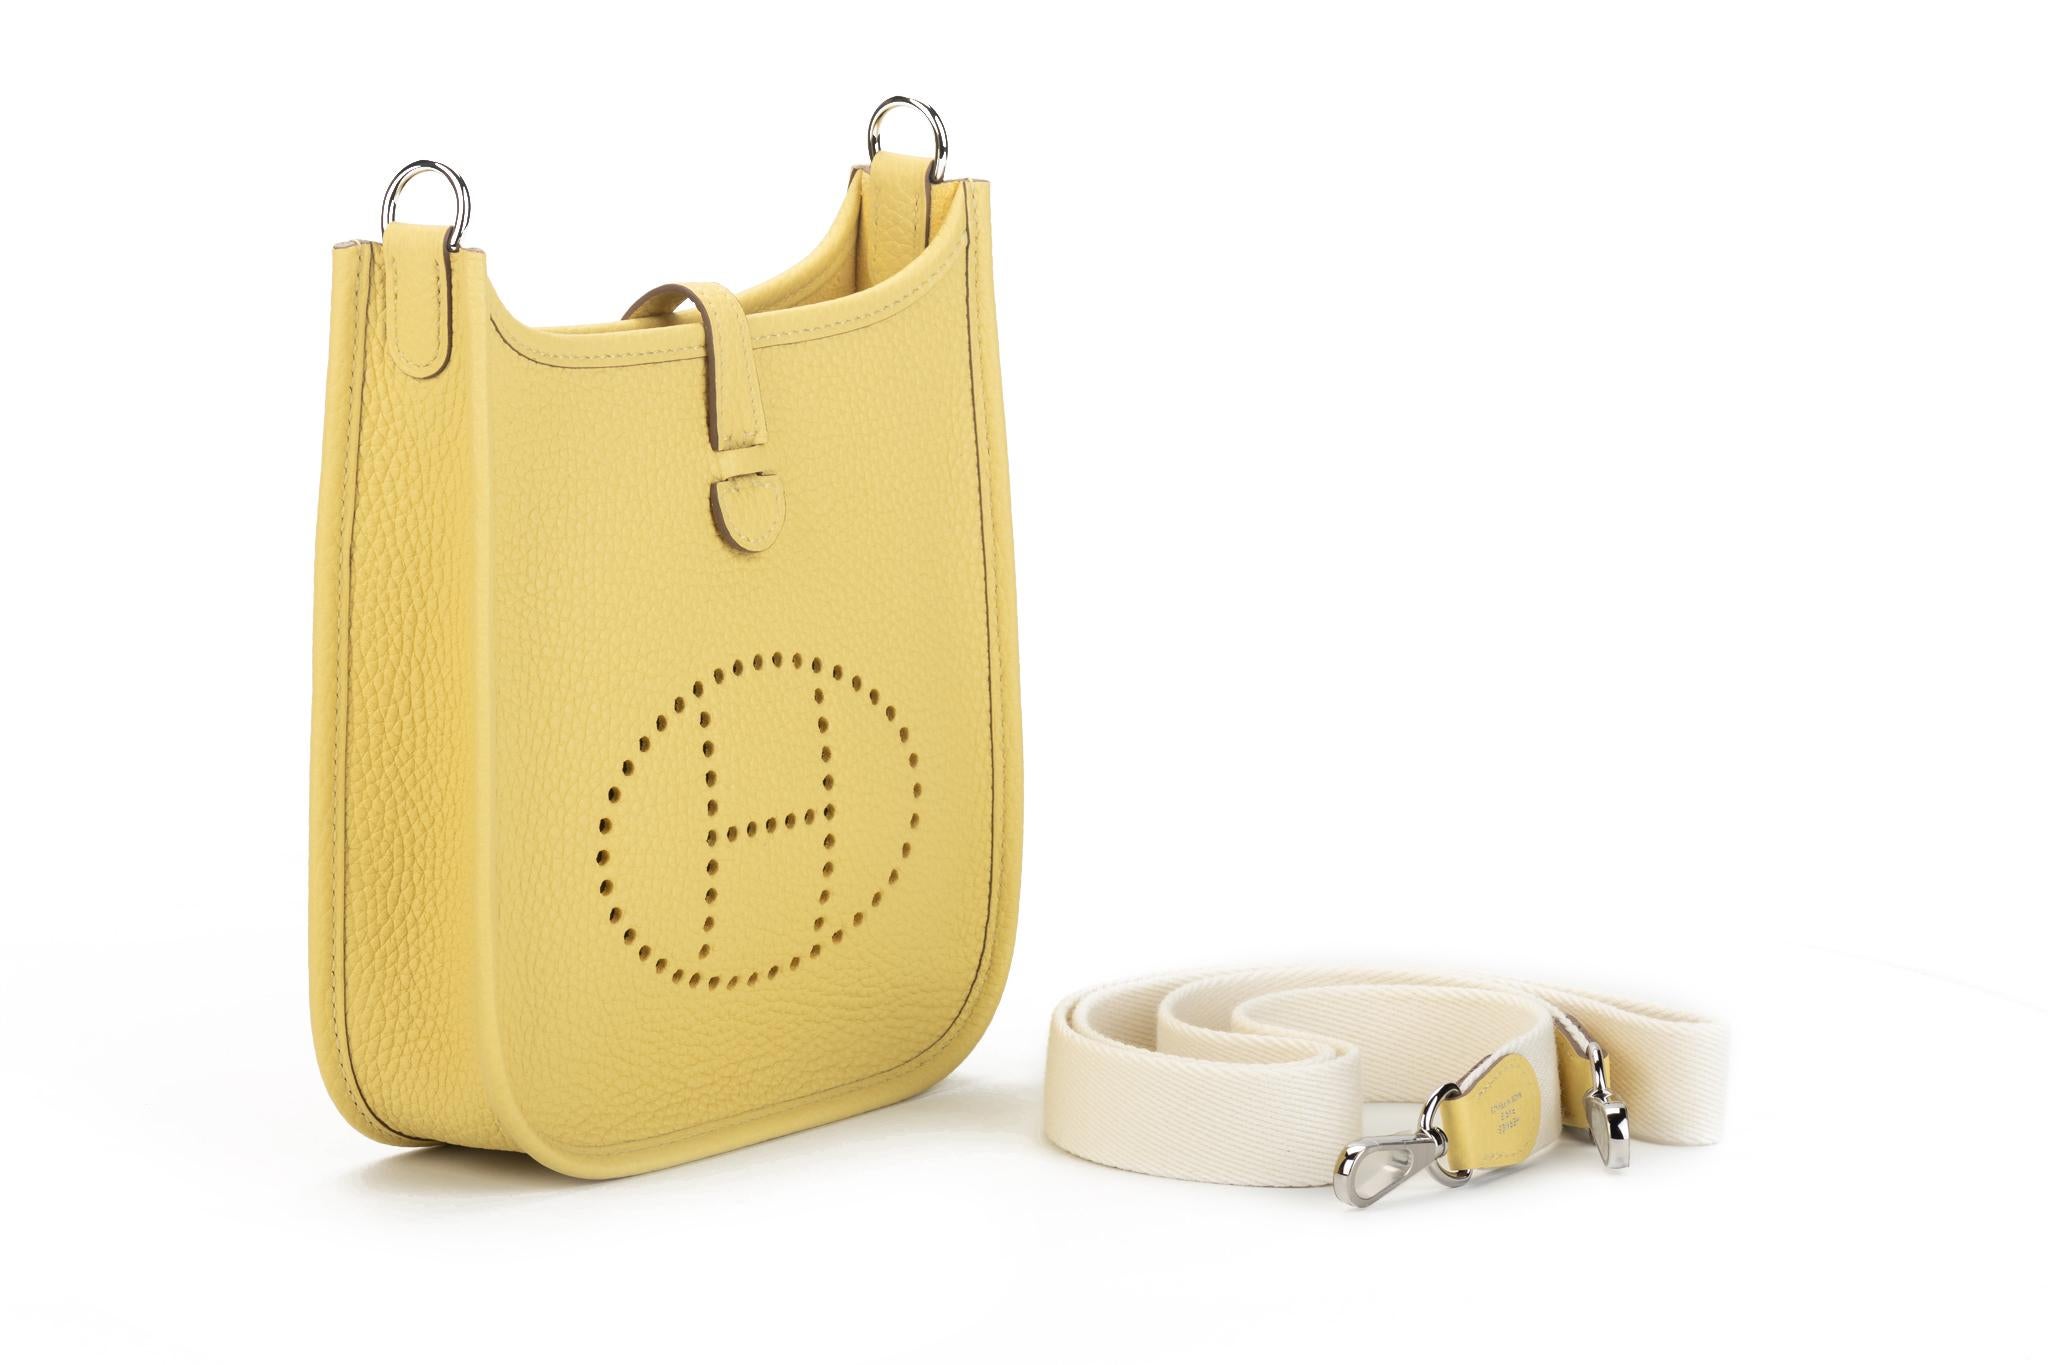 Hermès mini Evelyne shoulder bag in jaune poussin clemence leather with palladium hardware. off white shoulder strap. Never used. Dated 